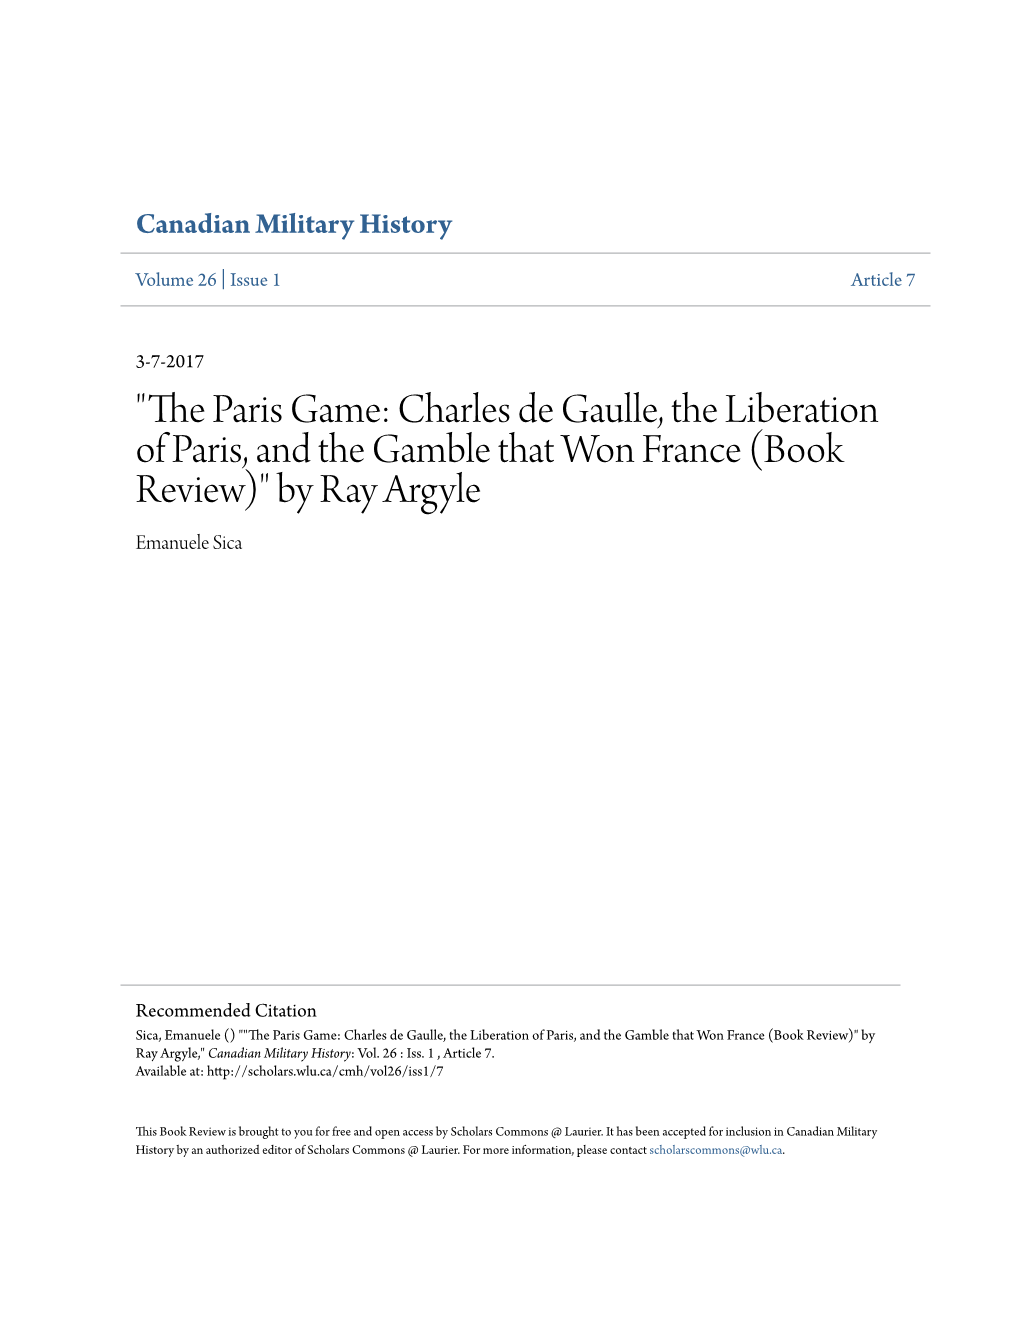 "The Paris Game: Charles De Gaulle, the Liberation of Paris, and The